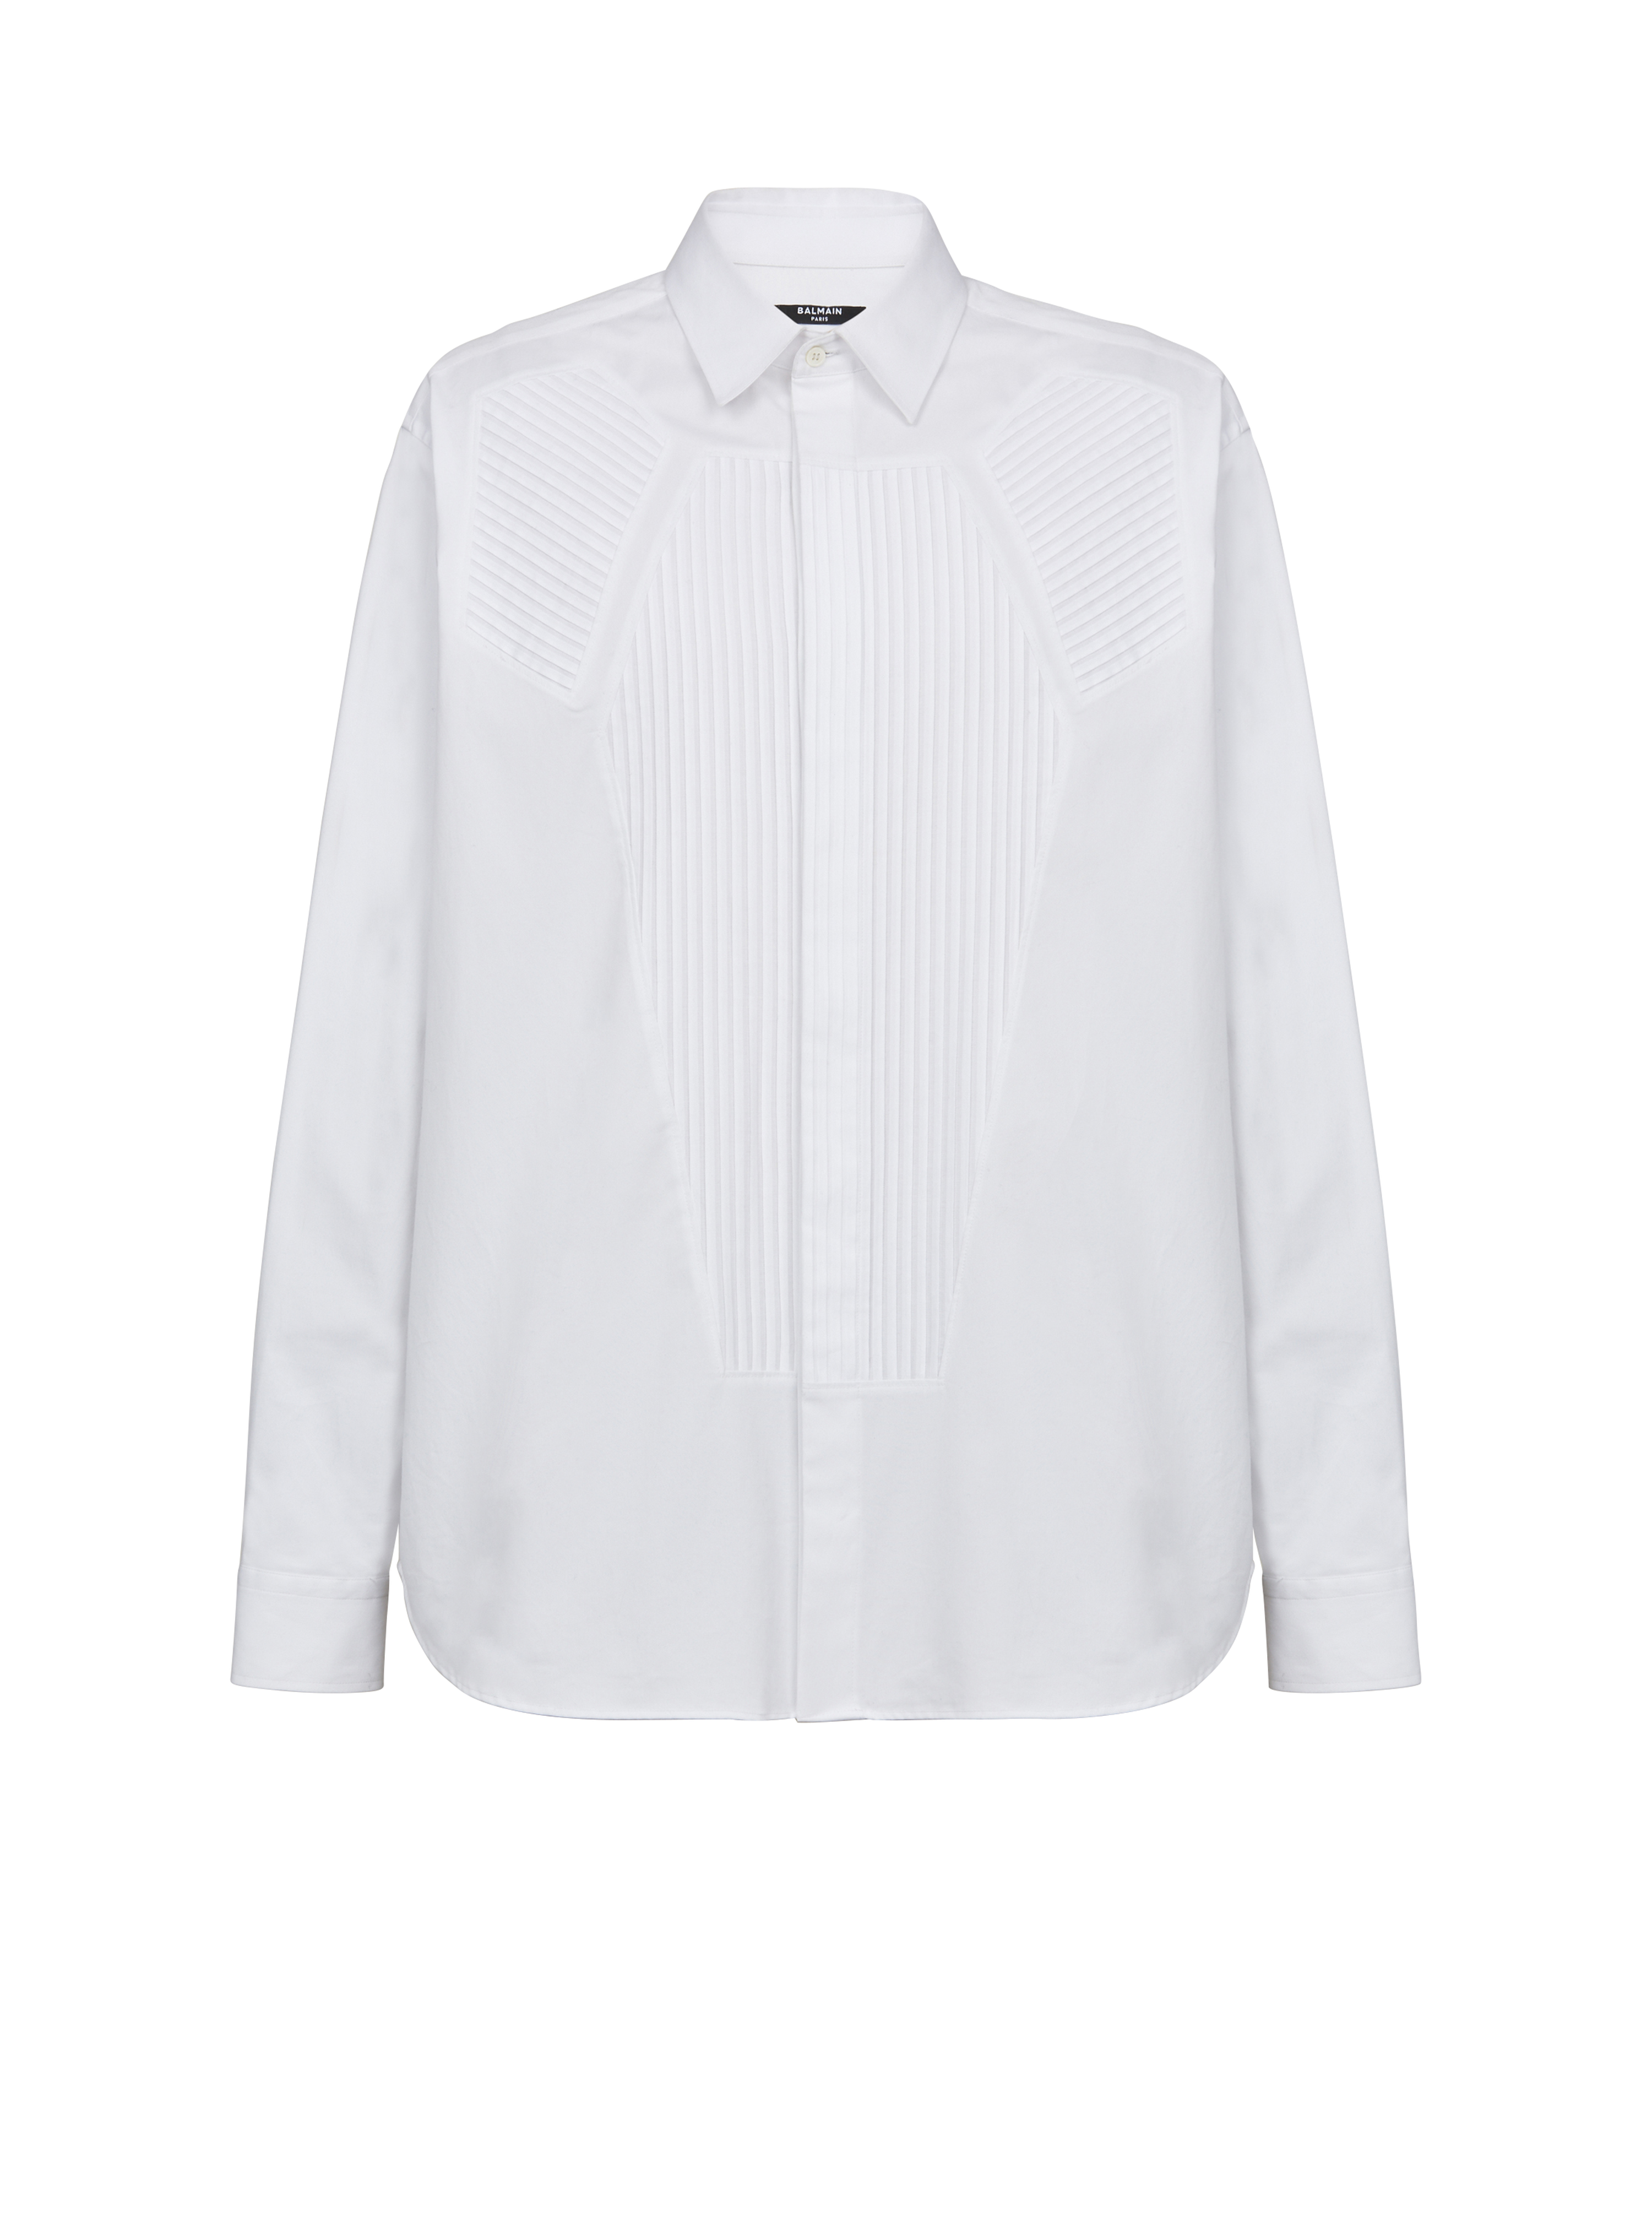 Cotton shirt with inserts, white